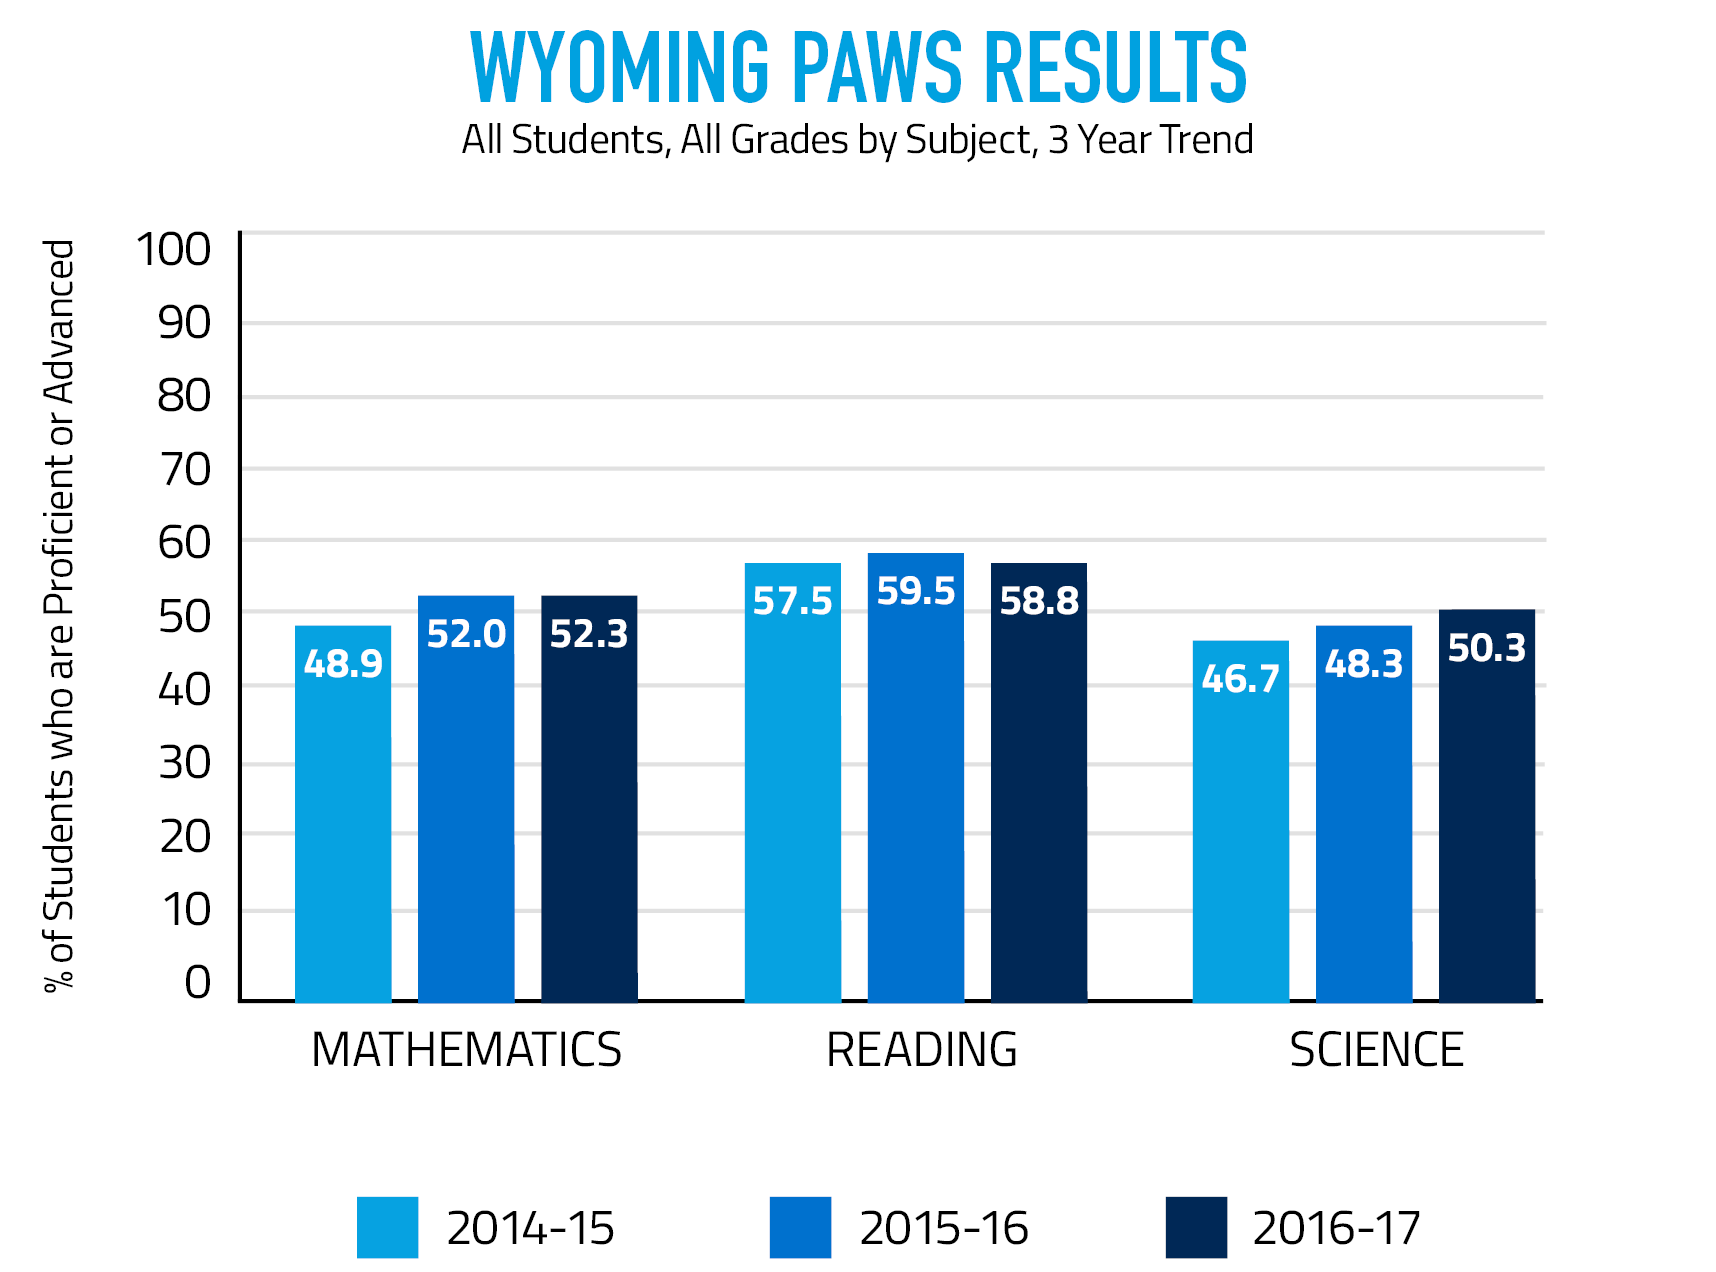 Wyoming PAWS Results - All Students, All Grades by Subject, 3 Year Trend. In mathematics, the percent of students who were proficient or advanced was 48.9 in 2014-15, 52.0 in 2015-16, and 52.3 in 2016-17. In reading, the percentage of students who were proficient or advanced was 57.5 in 2014-15, 59.5 in 2015-16, and 58.8 in 2016-17. In Science, the percentage of students who were proficient or advanced was 46.7 in 2014-15, 48.3 in 2015-16, and 50.3 in 2016-17.